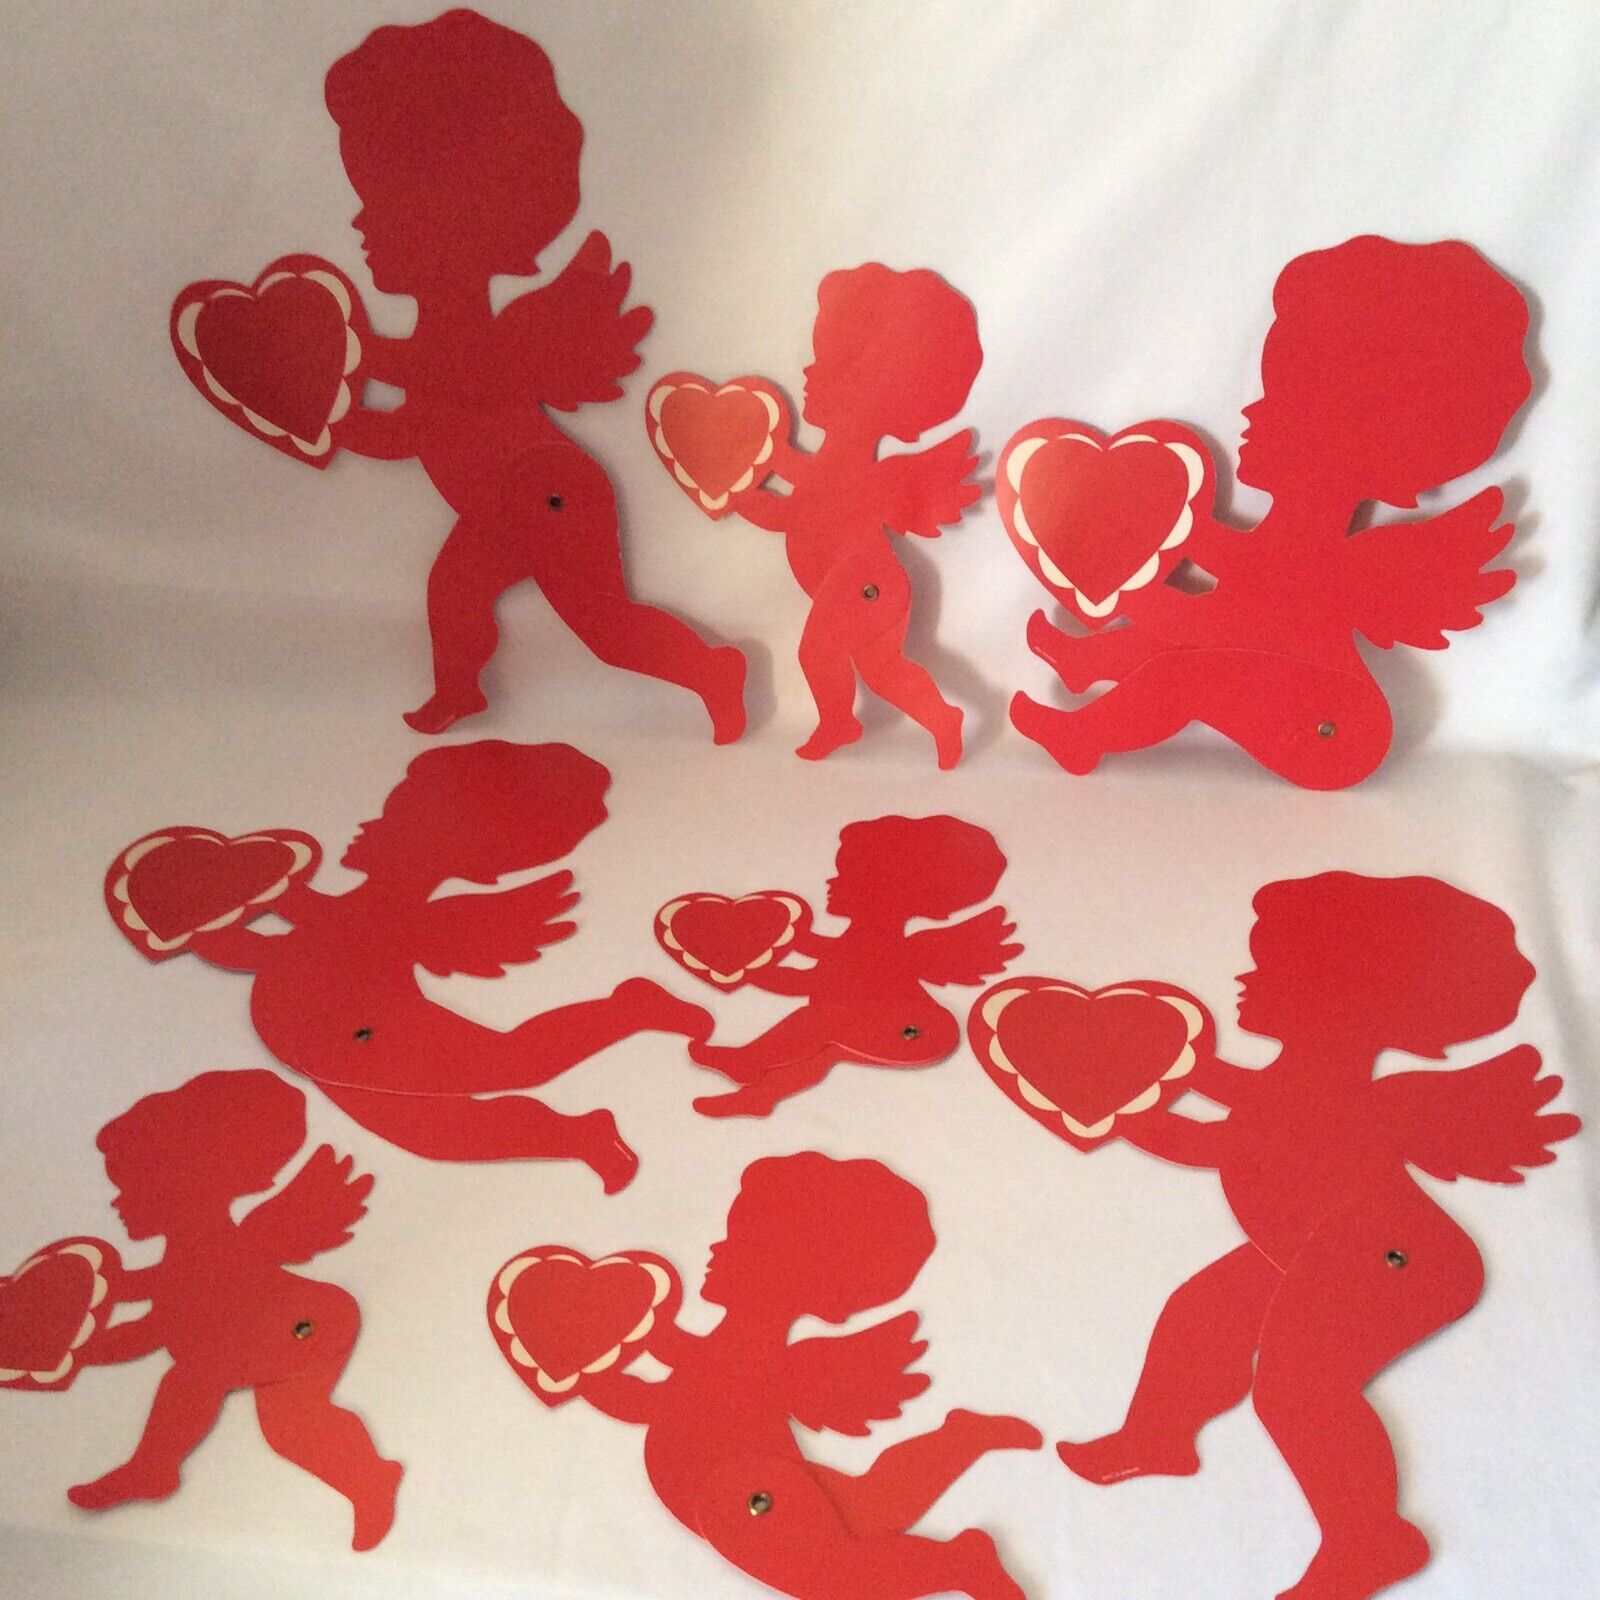 Vintage Valentines Day Cupid Cut Out Decorations Red Cupid Silhouettes Denmark